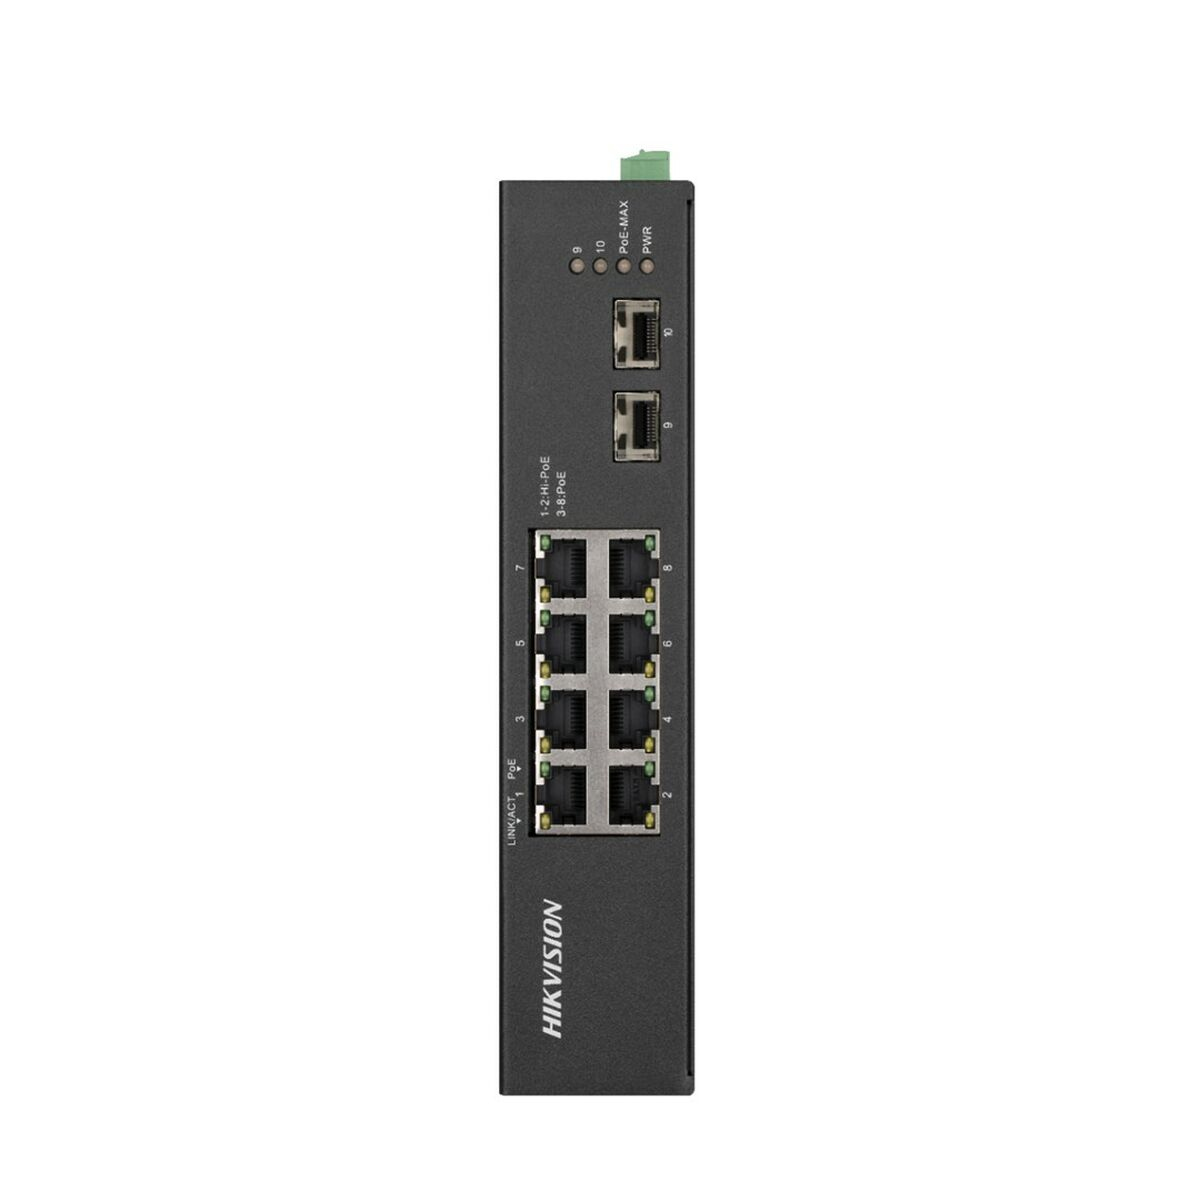 mit 8 Switch Ports HIKVISION PoE-Switch DS-3T0510HP-E/HS